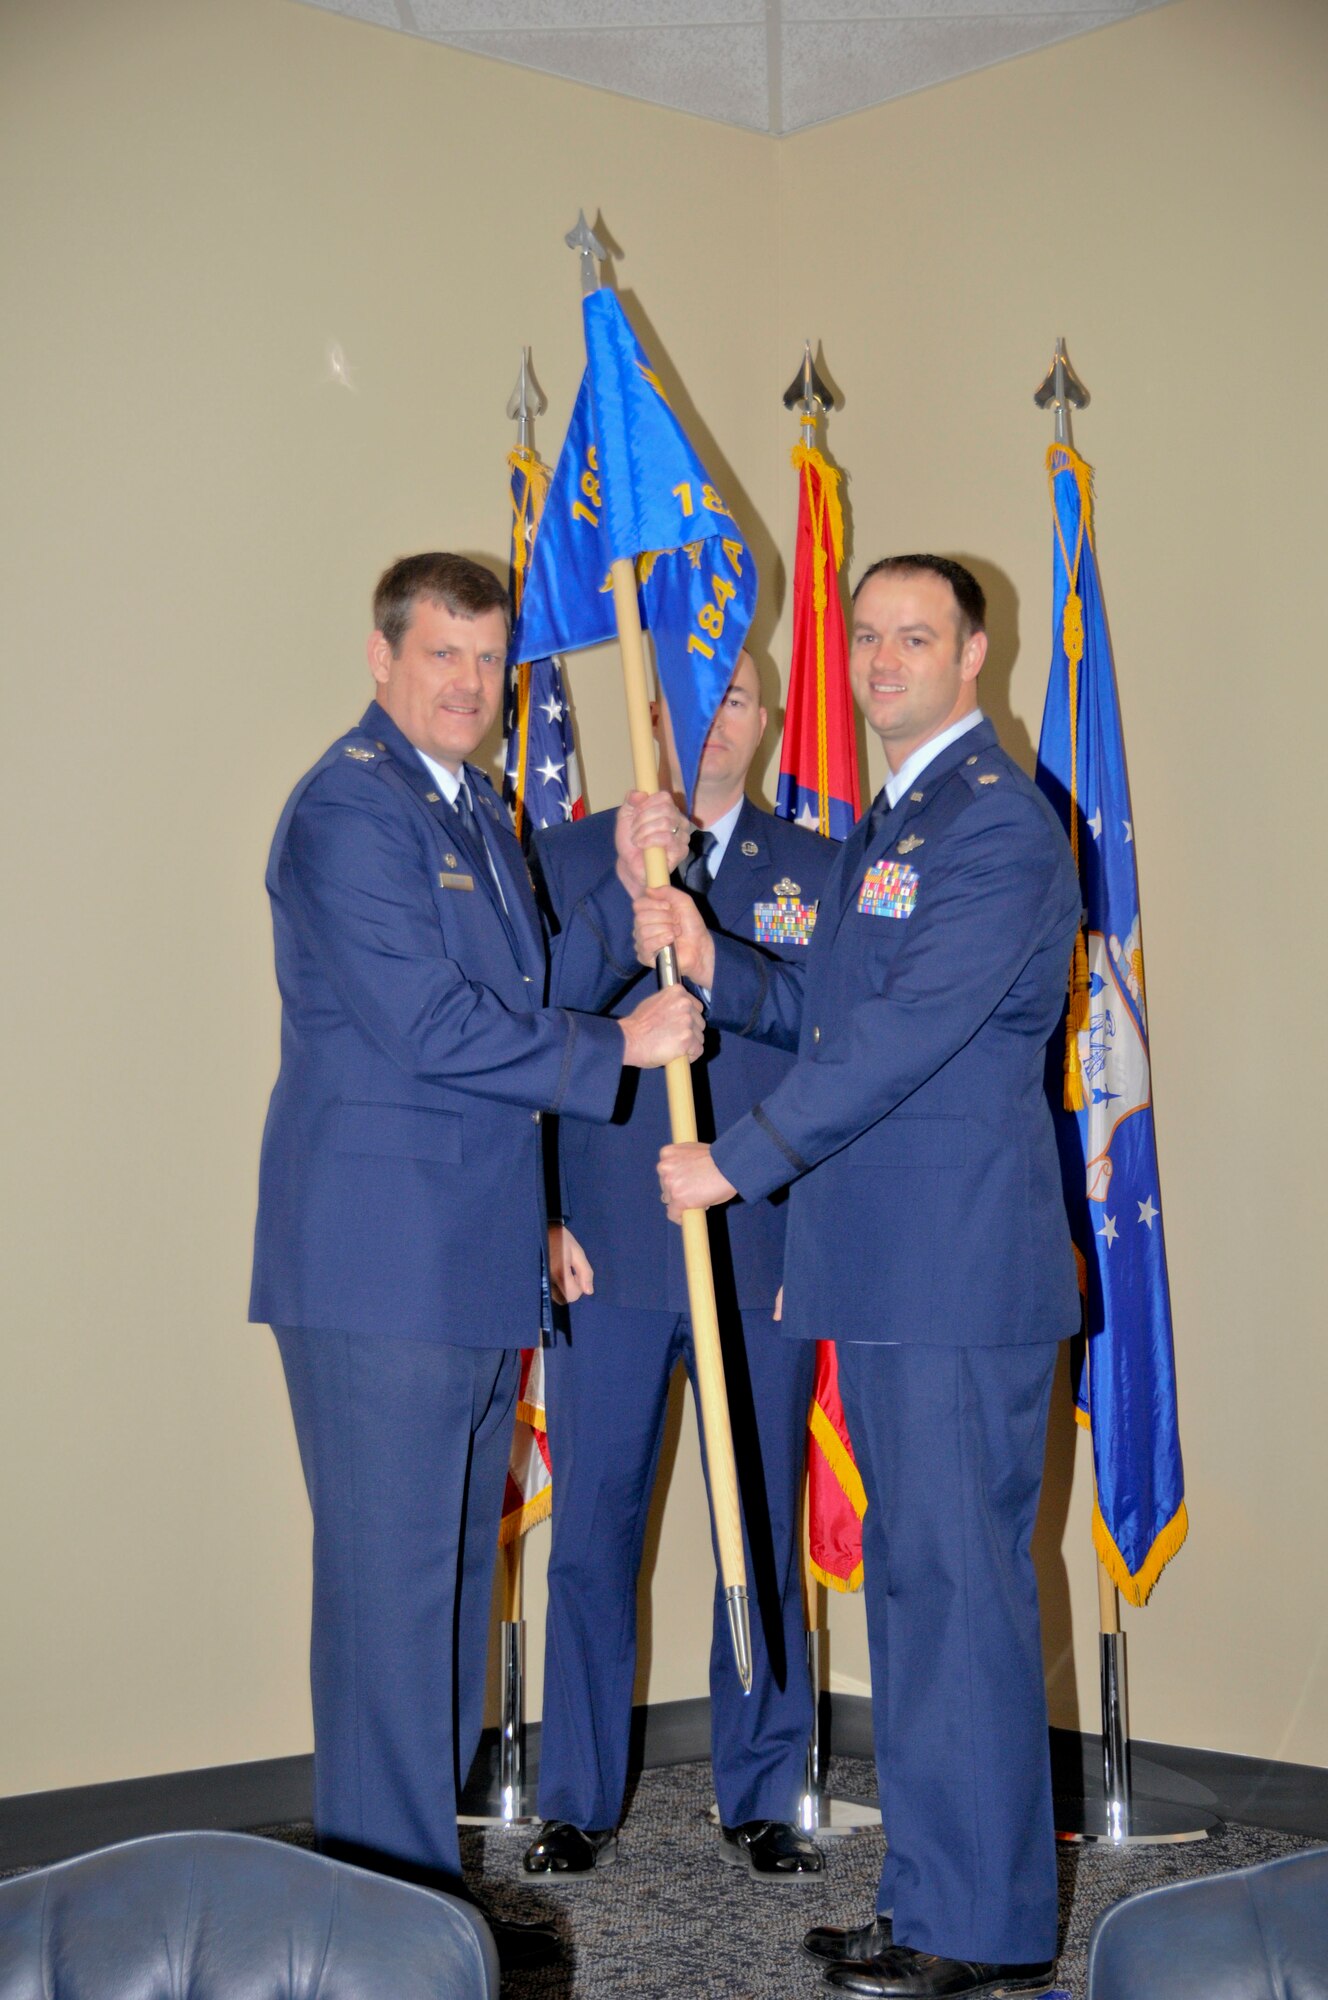 Col. Brian Burger, 188th Operations Group commander, passes the guidon to Lt. Col. Jeremiah Gentry, 184th Attack Squadron commander, signifying the assumption of command of the newly re-designated 184th ATKS March 8, 2015, during a ceremony held at Ebbing Air National Guard Base, Fort Smith, Ark. Gentry, a former A-10 Thunderbolt II "Warthog", MQ-9 Reaper and F-16 Falcon pilot, served on active duty for 11 years before transitioning to the Arkansas Air National Guard. (U.S. Air National Guard photo by Staff Sgt. John Suleski/released)